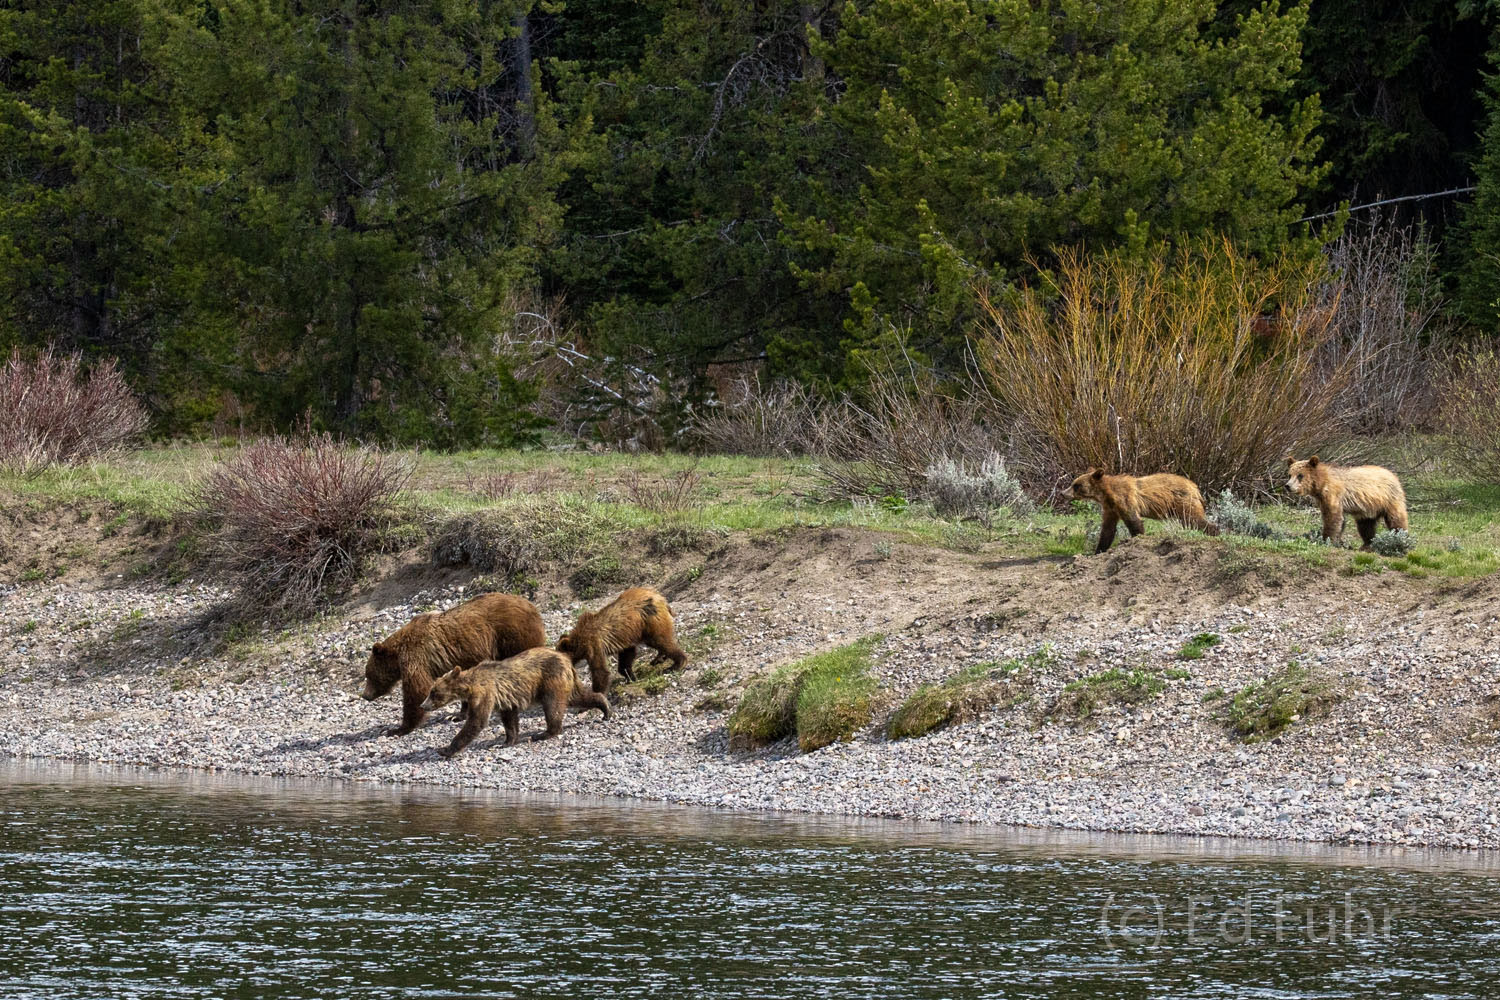 Grizzly 399 has decided the waters are now low and slow enough - it is time to cross the Snake River with her four cubs.